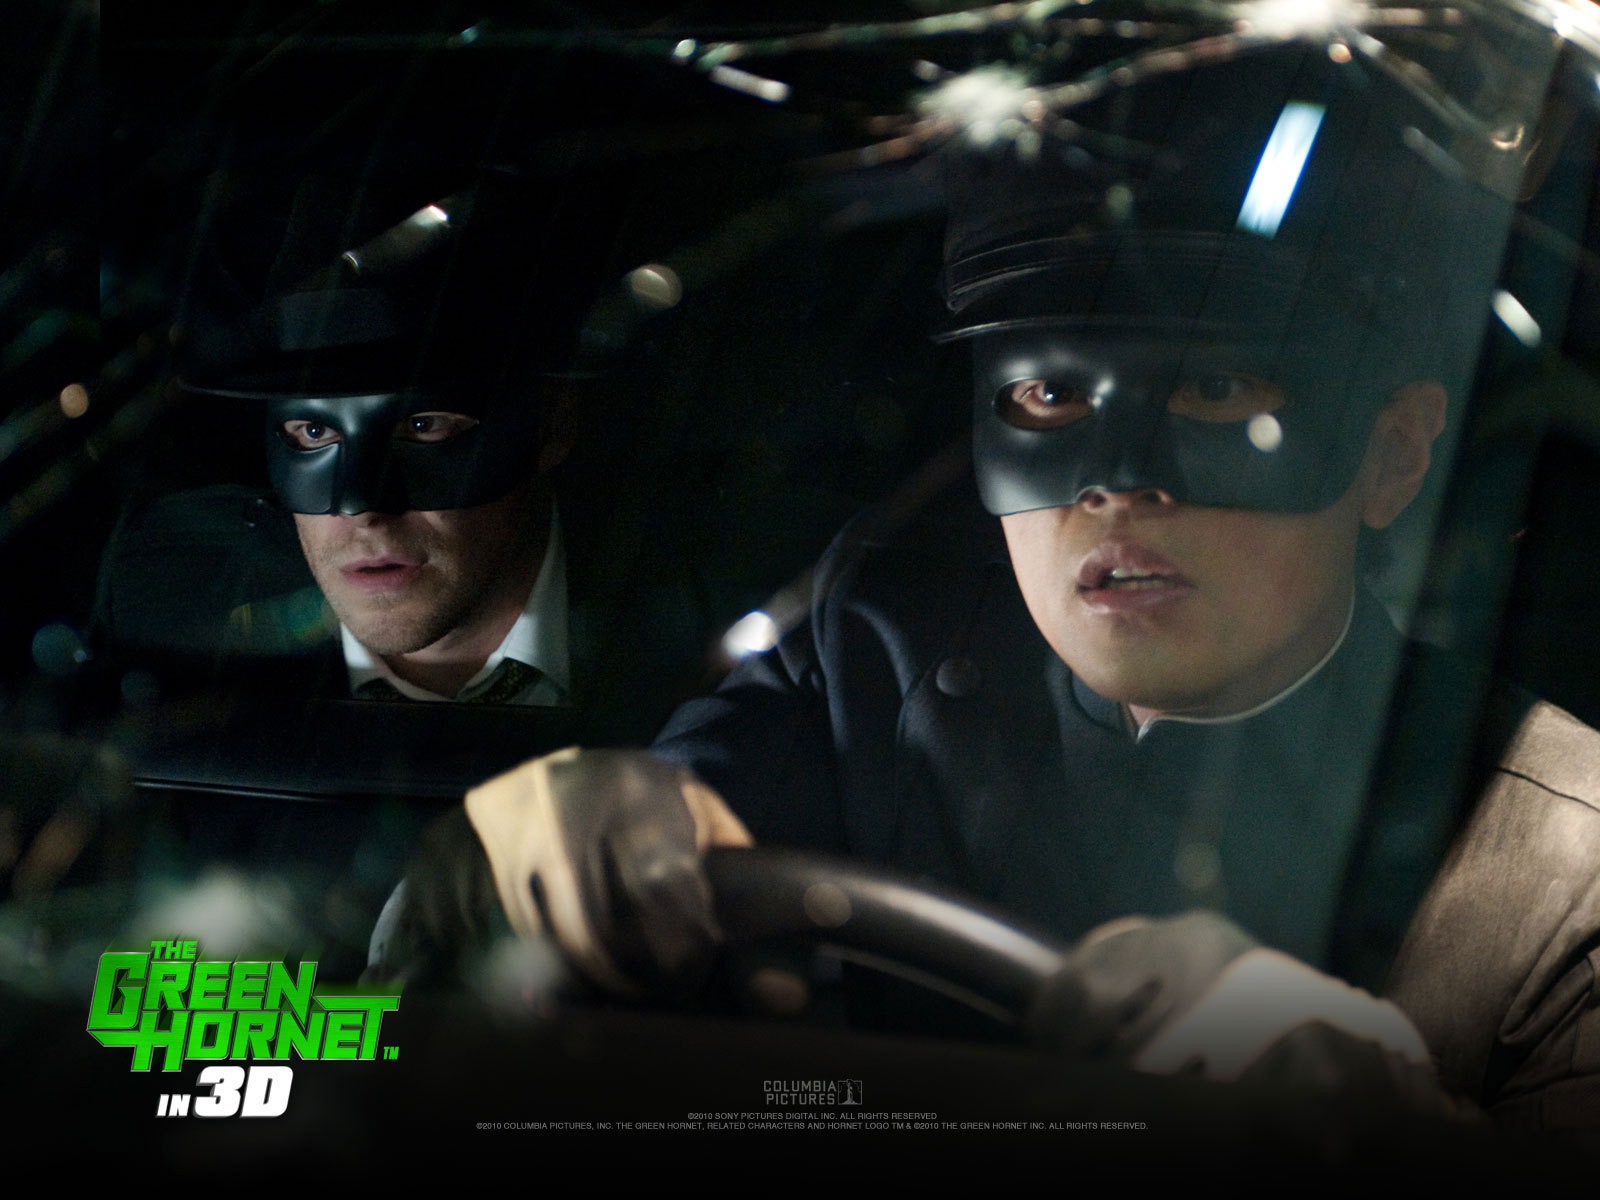 Download HQ The Green Hornet wallpaper / Movies / 1600x1200